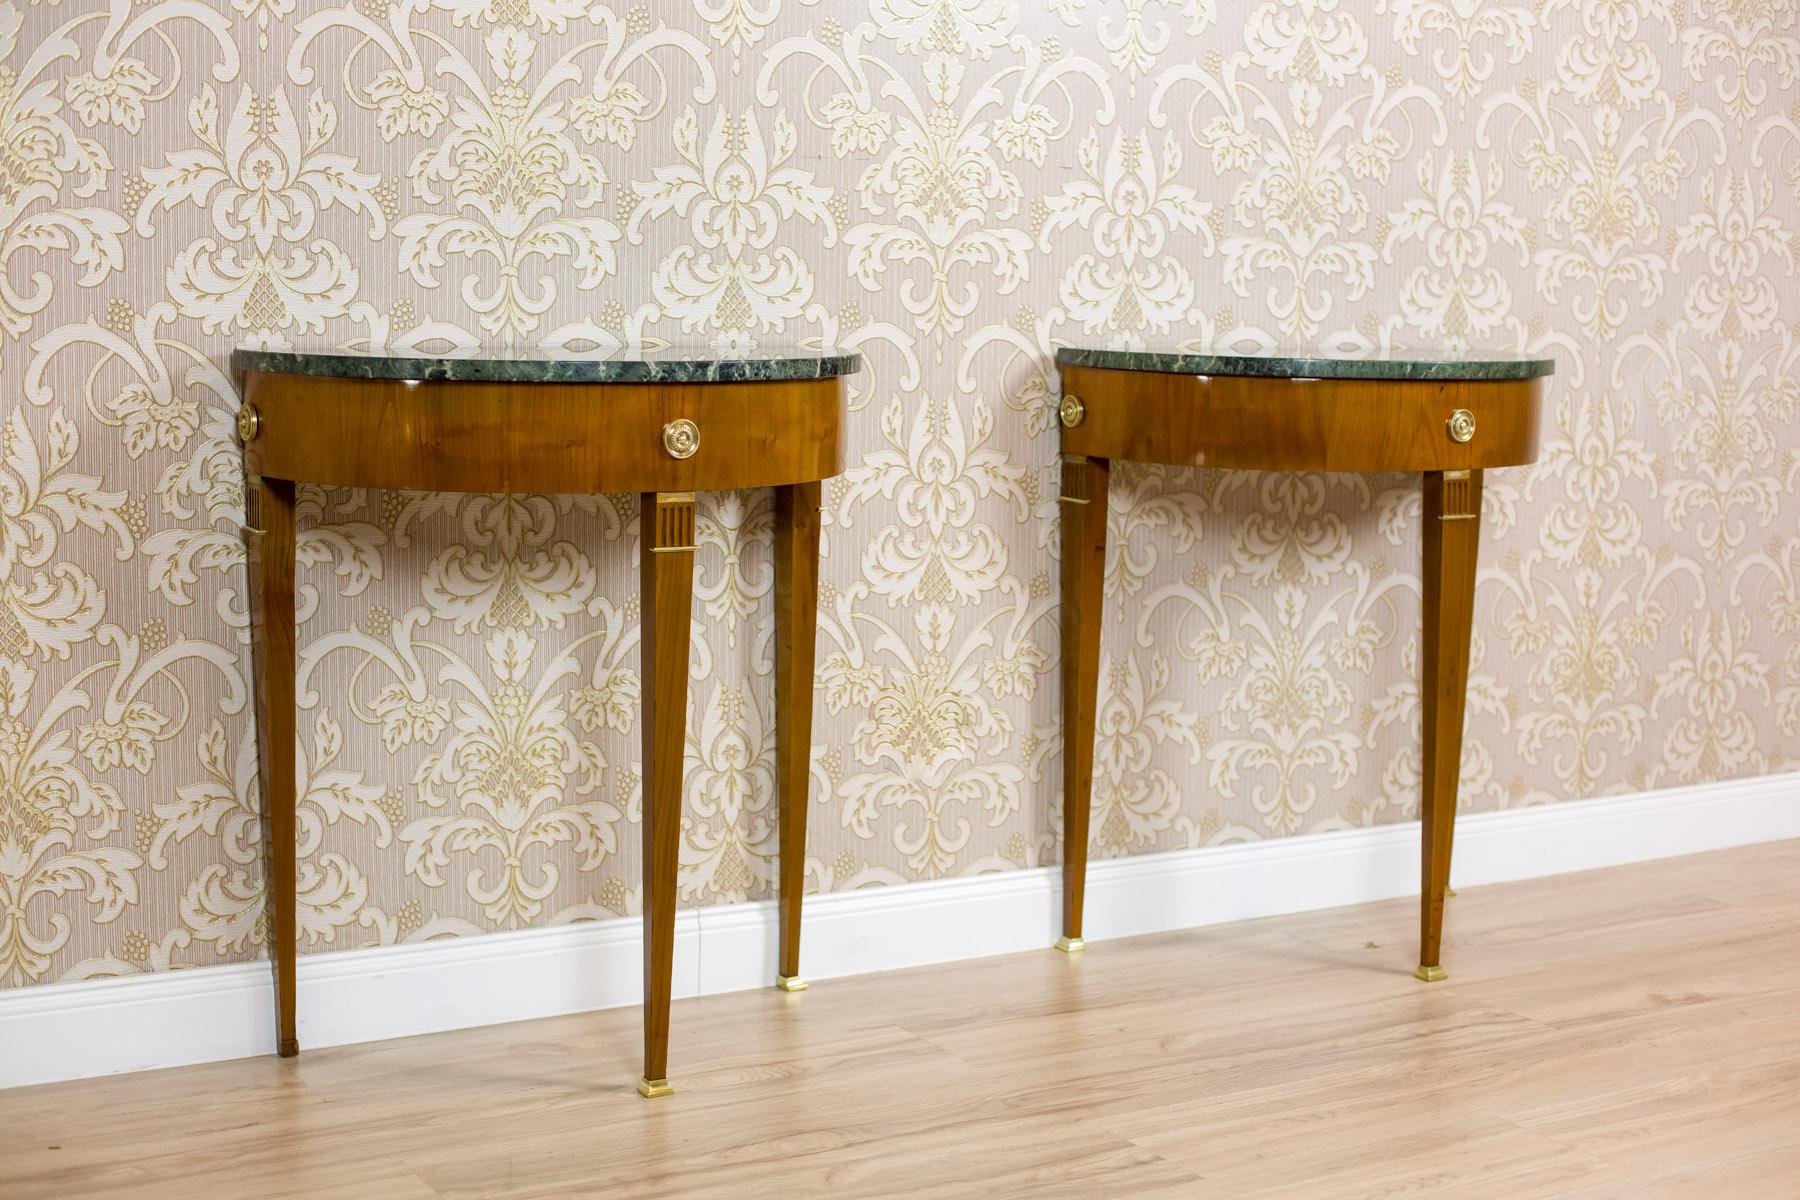 We present you this pair of wall tables, also called console tables, with marble tops in the shape of a semicircle.
The wide molding under the top is ornamented with brass rosettes on the line of legs.
Furthermore, the legs narrow towards the